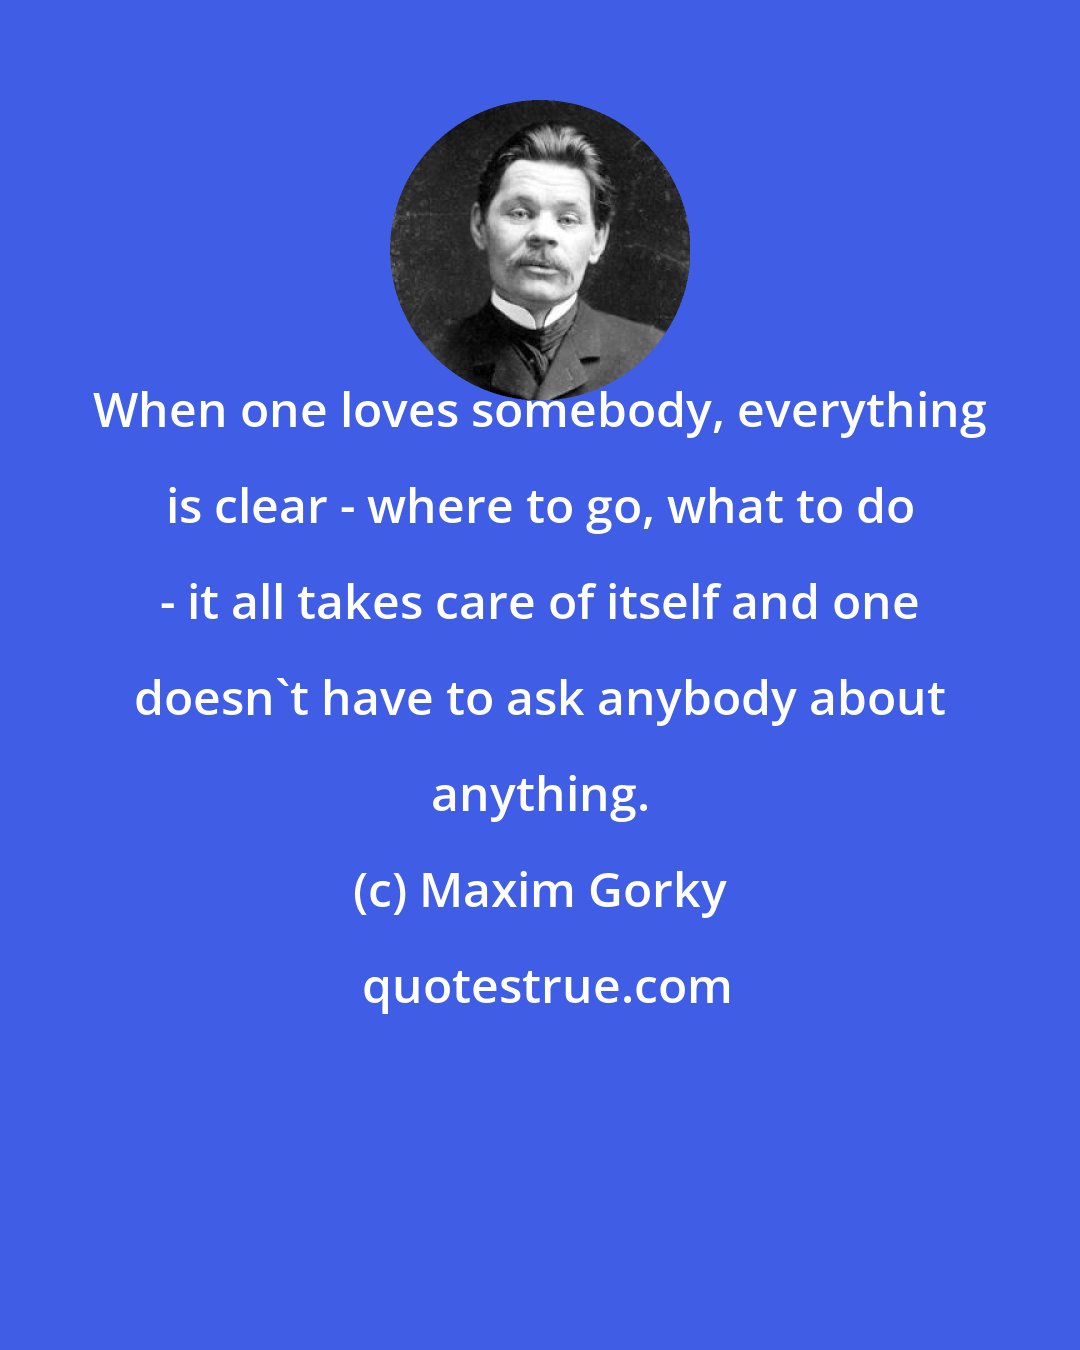 Maxim Gorky: When one loves somebody, everything is clear - where to go, what to do - it all takes care of itself and one doesn't have to ask anybody about anything.